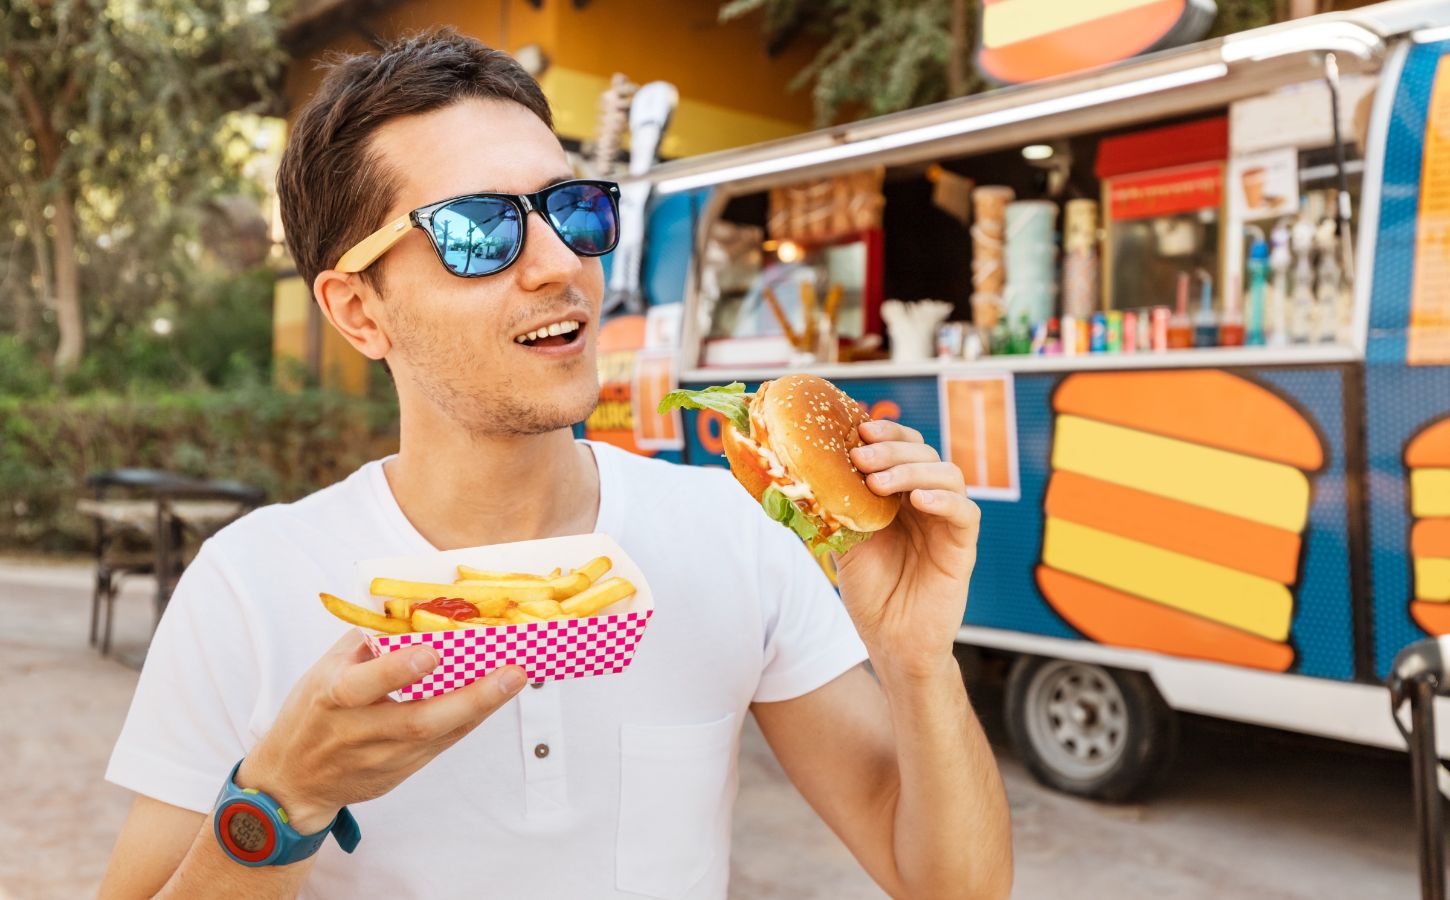 A man eating a meat burger in front of a food truck and wearing polarized sunglasses